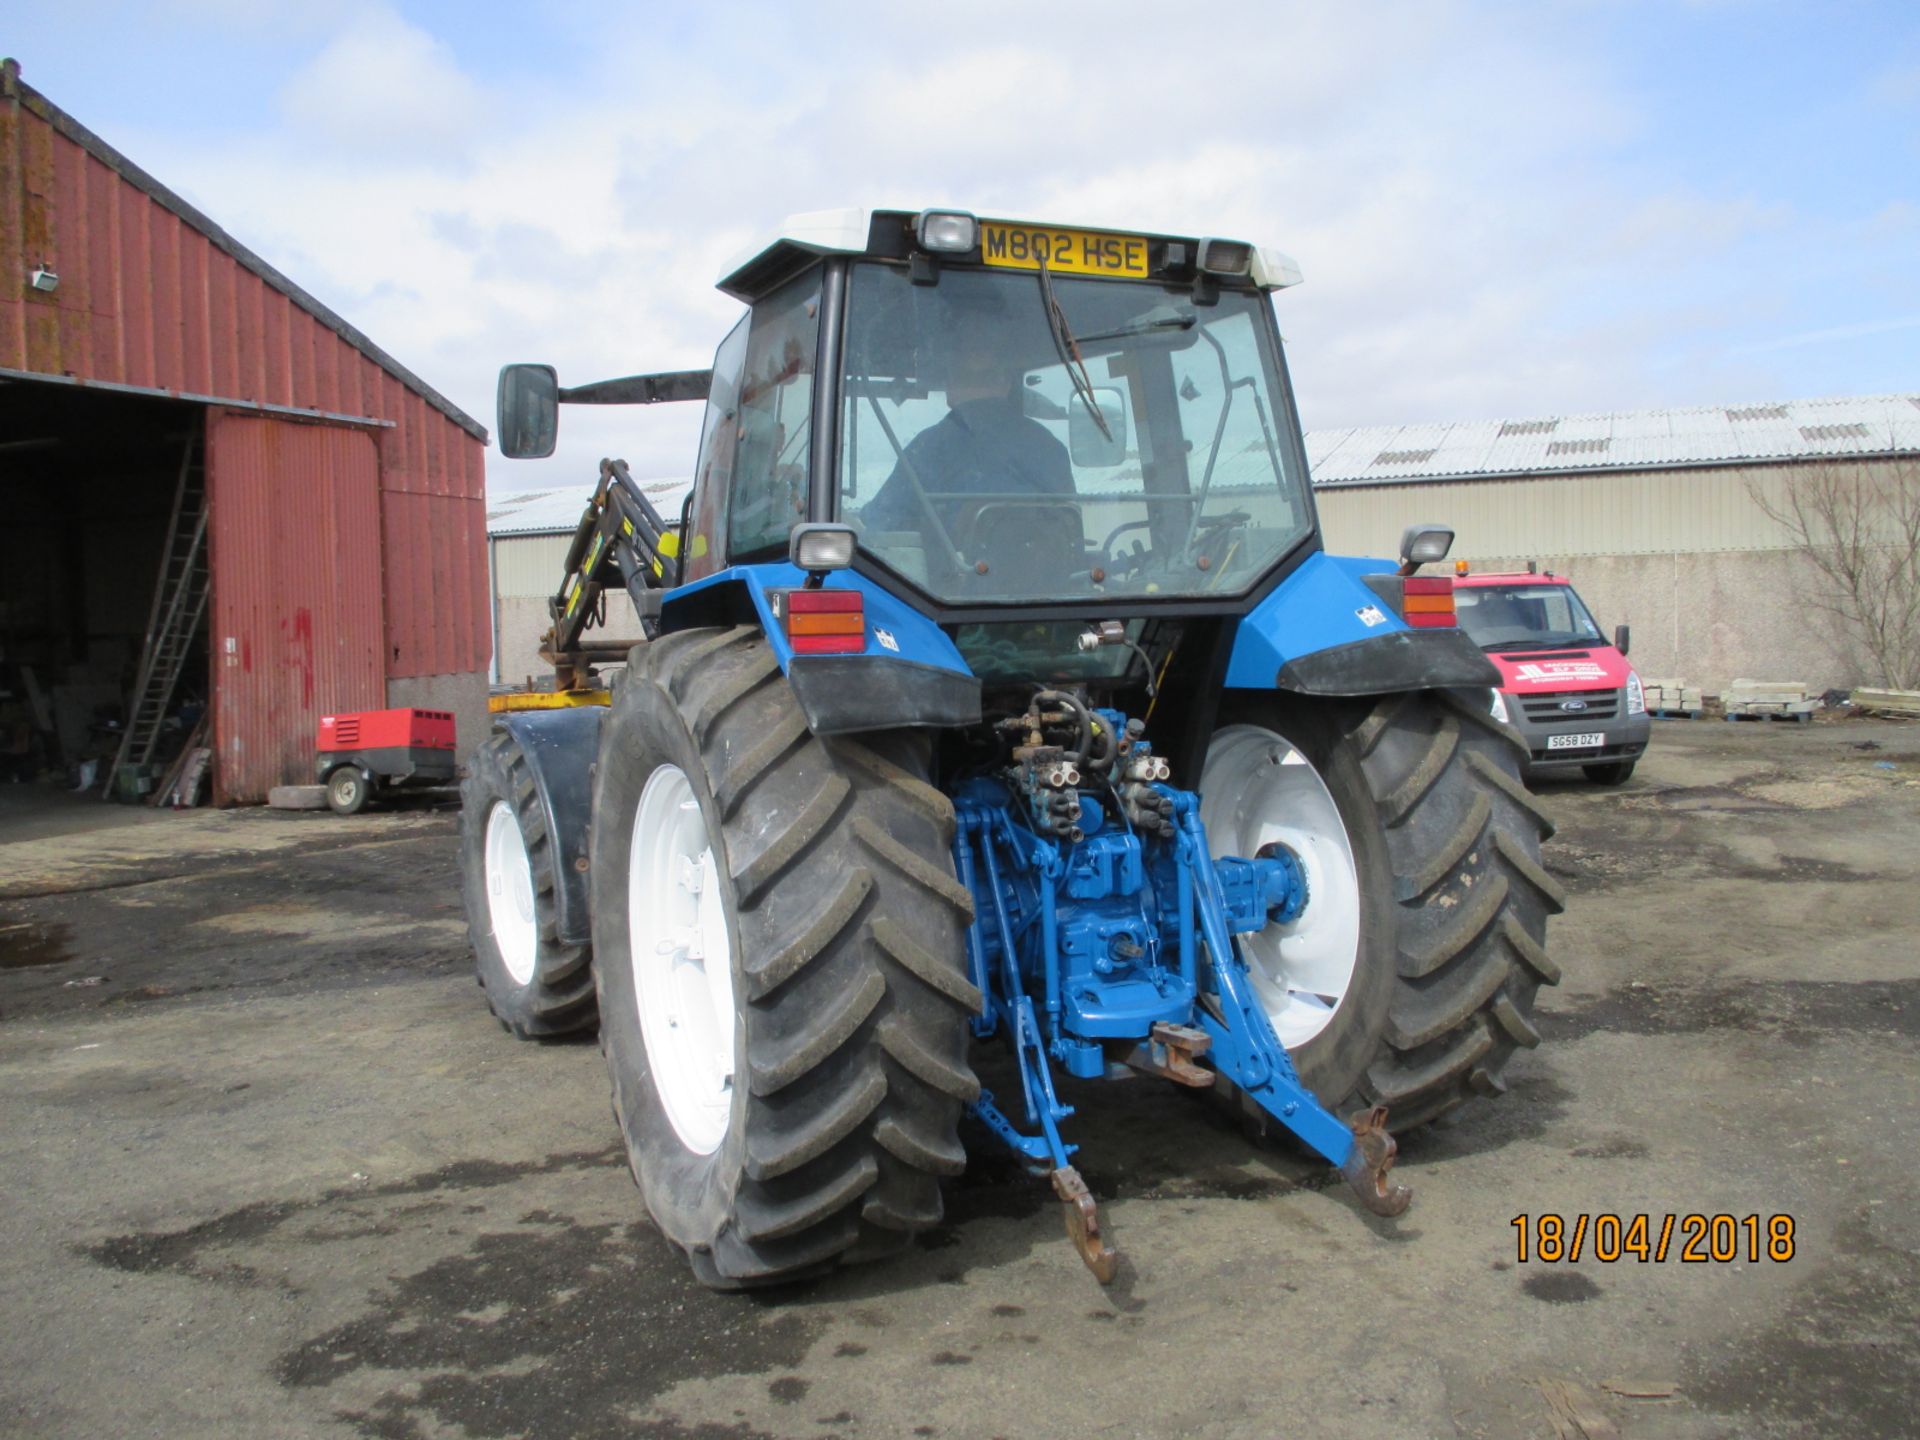 1 No. M802 HSE - Ford New Holland 8340 SLE 4 Wheel Drive Tractor - Image 2 of 4